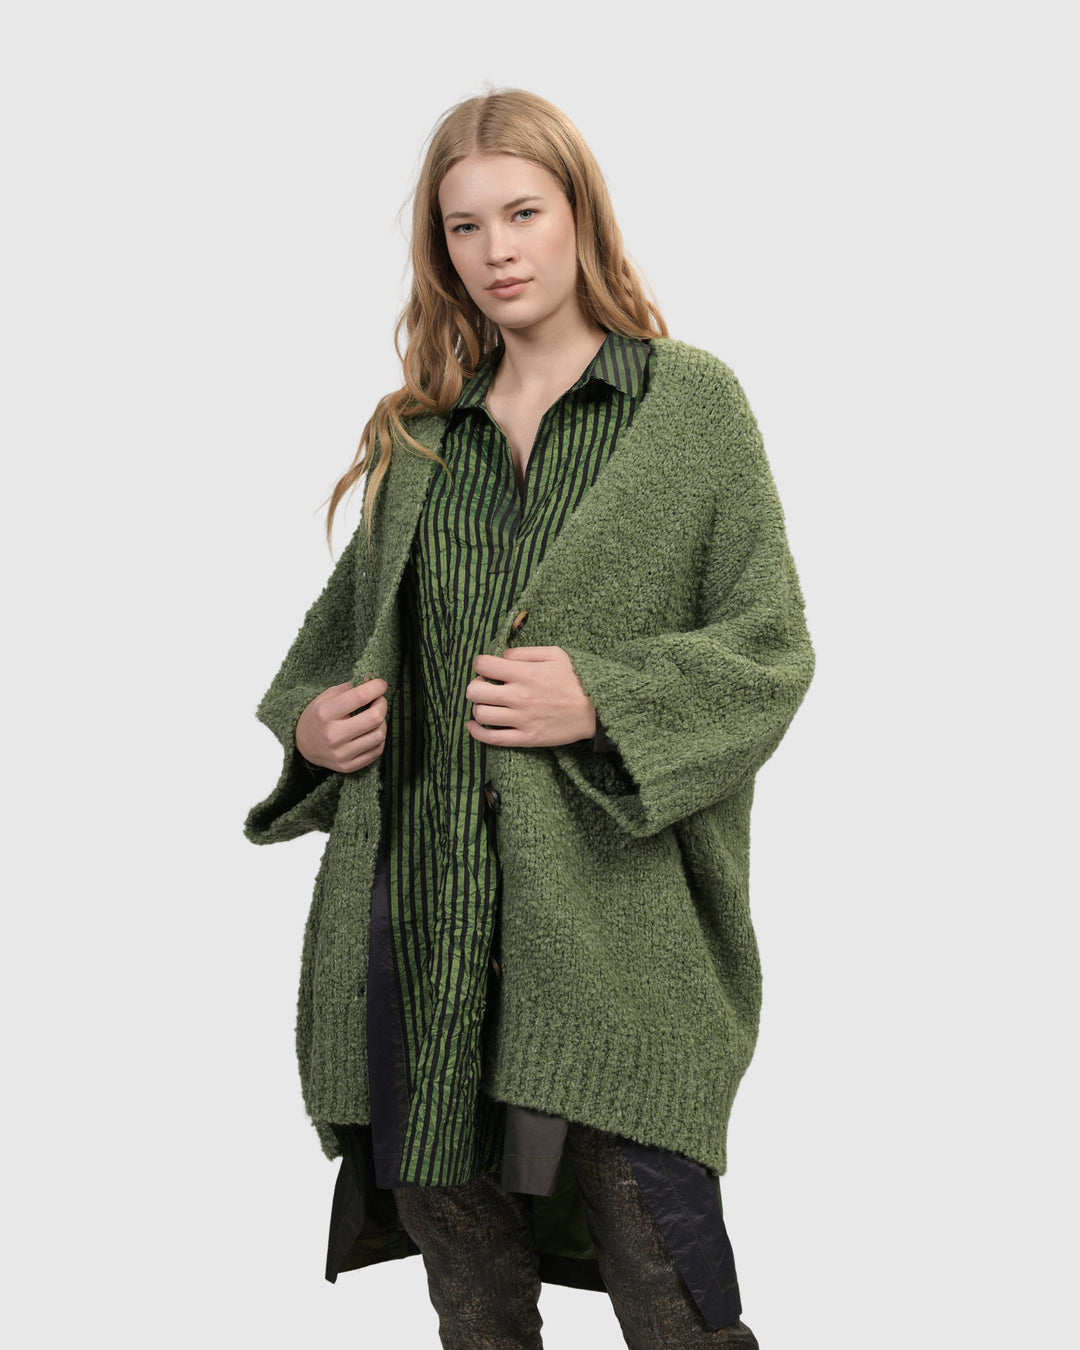 A cozy woman layering the Sunday Cardigan, Green by ALEMBIKA over black leggings.